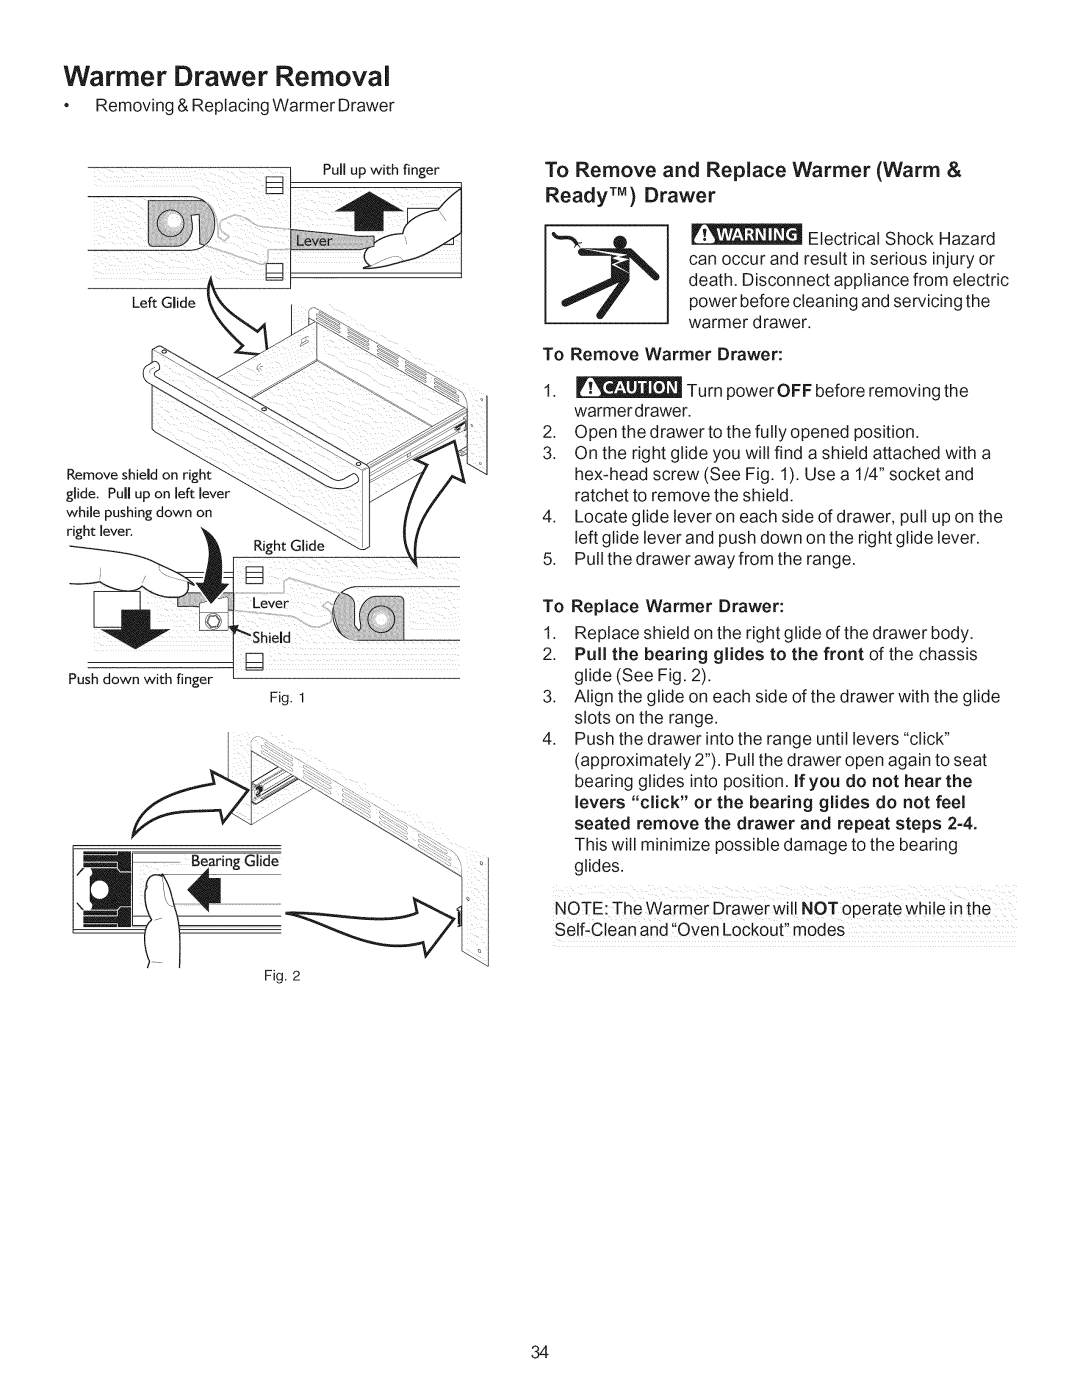 Kenmore 790.9662 manual Warmer Drawer Removal, To Remove and Replace Warmer Warm, Ready TM Drawer 